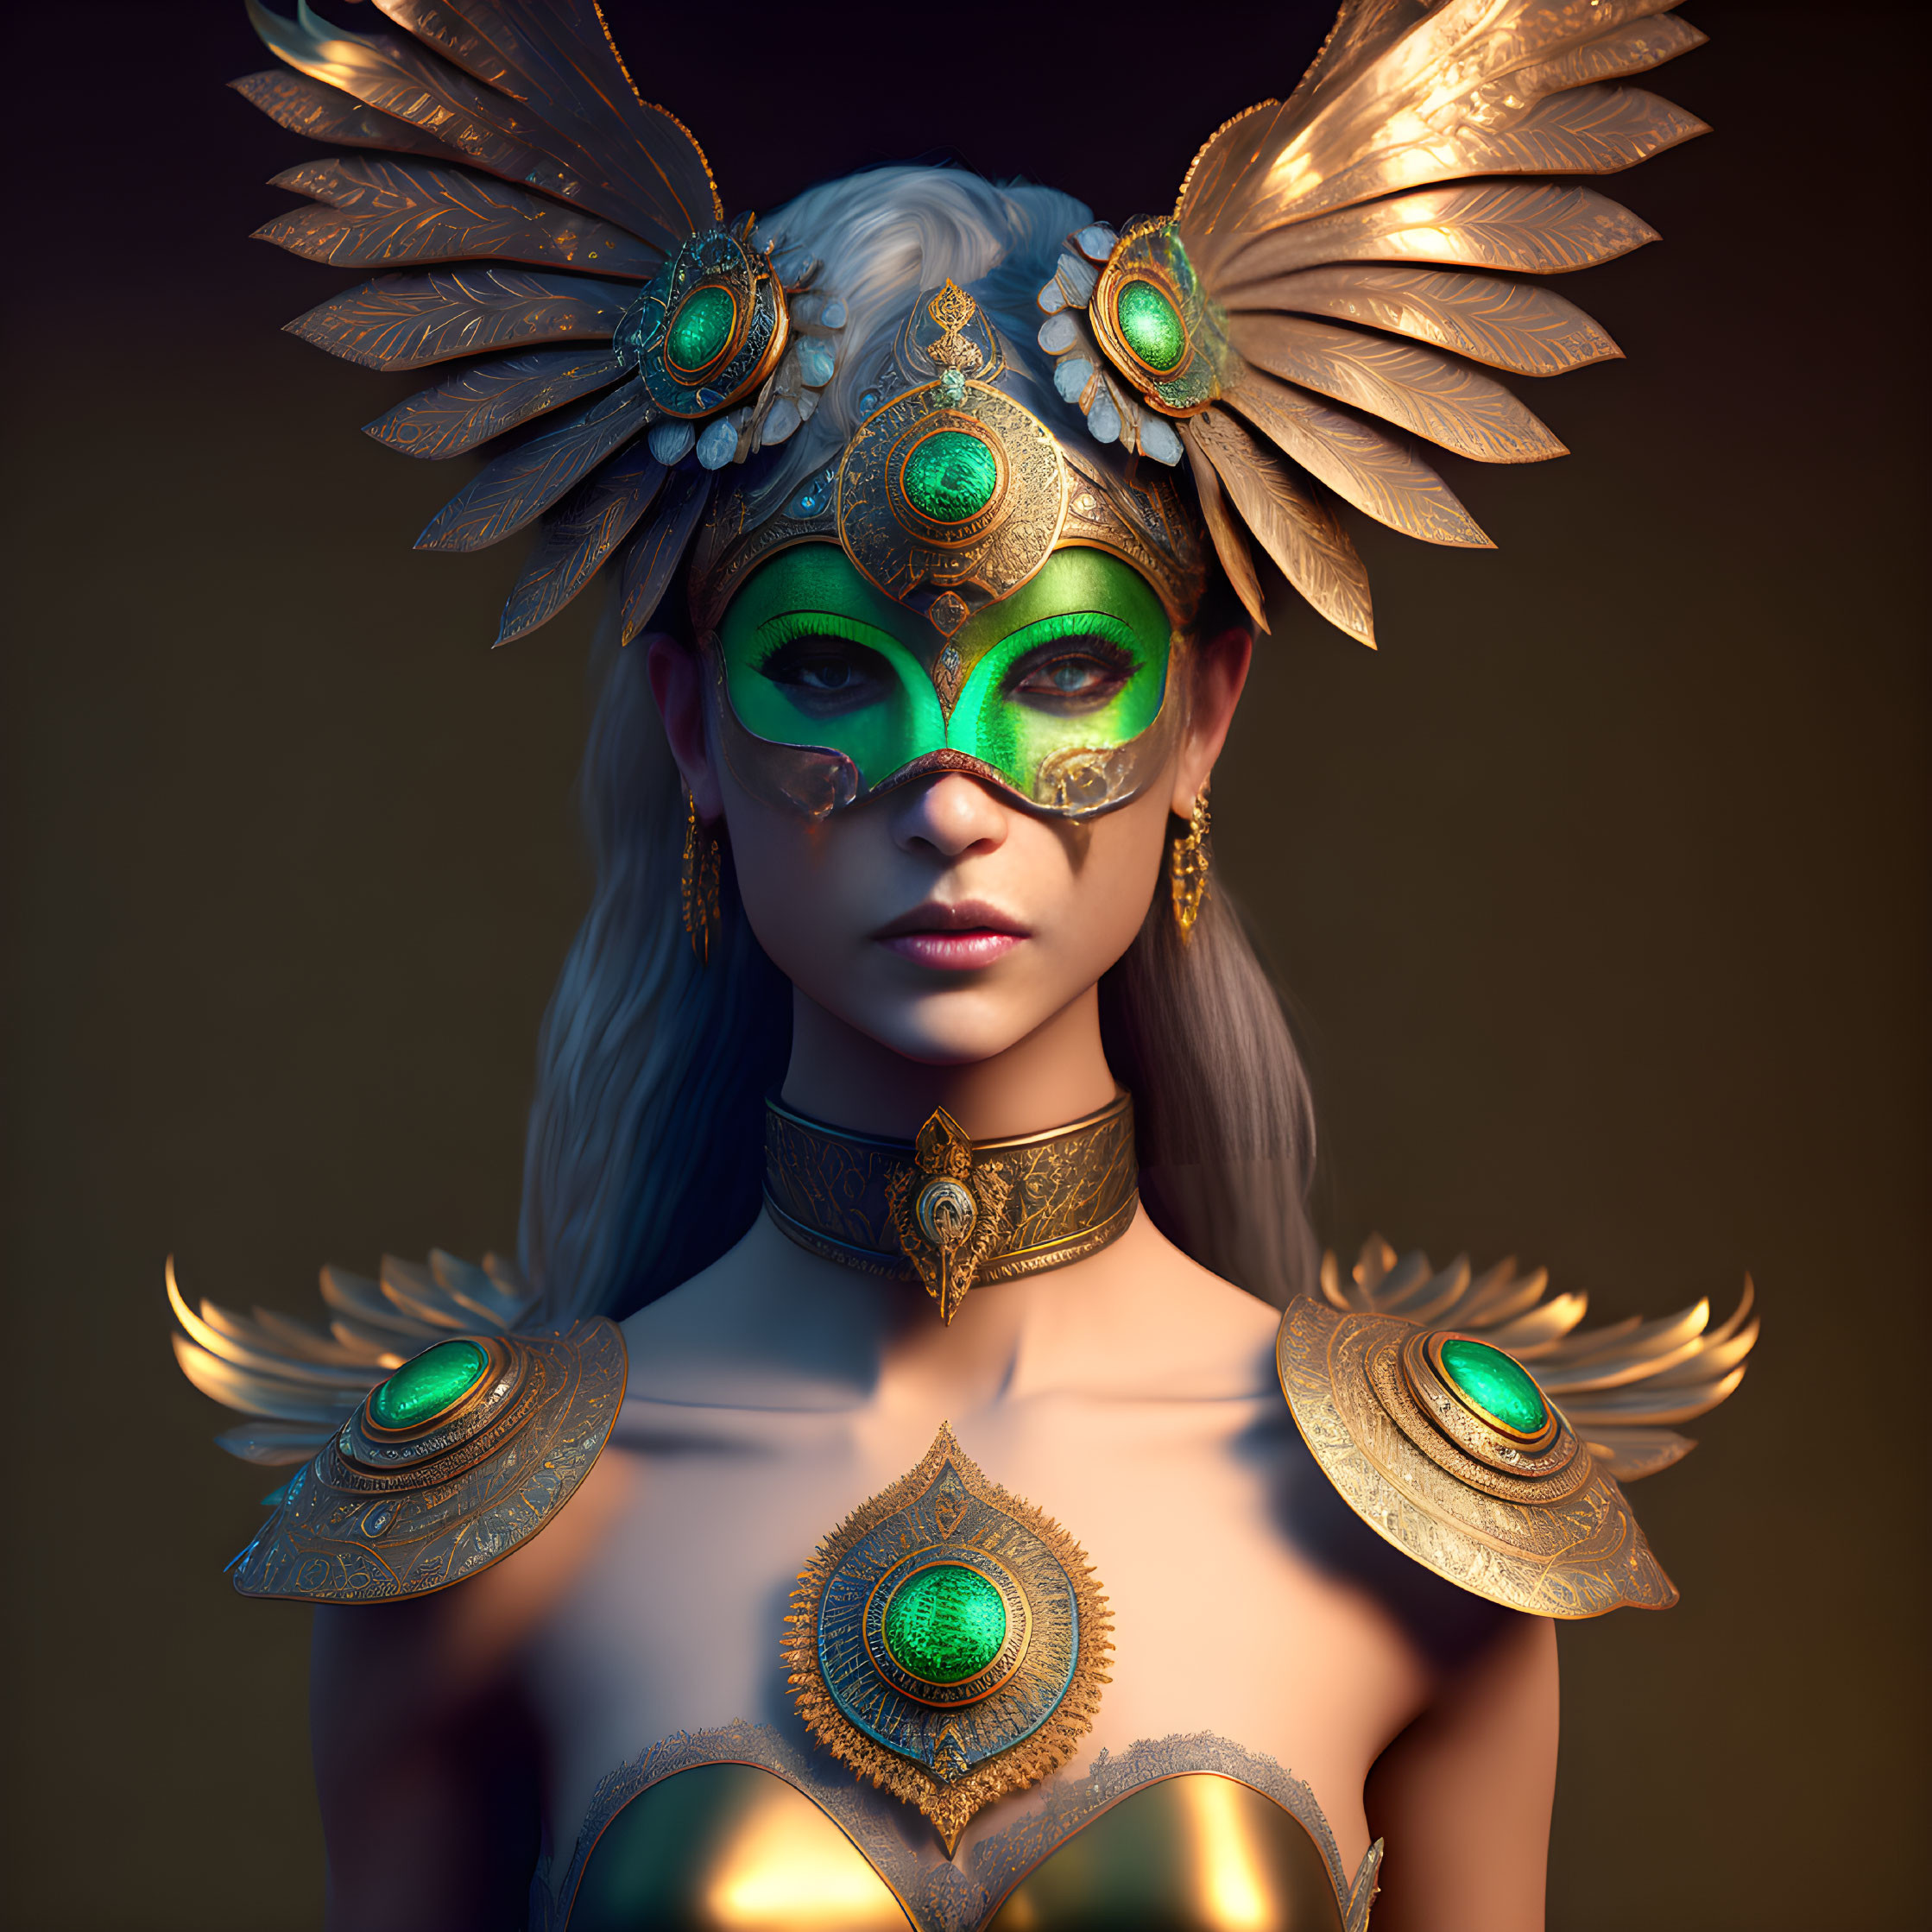 Regal woman in gold and green feathered attire